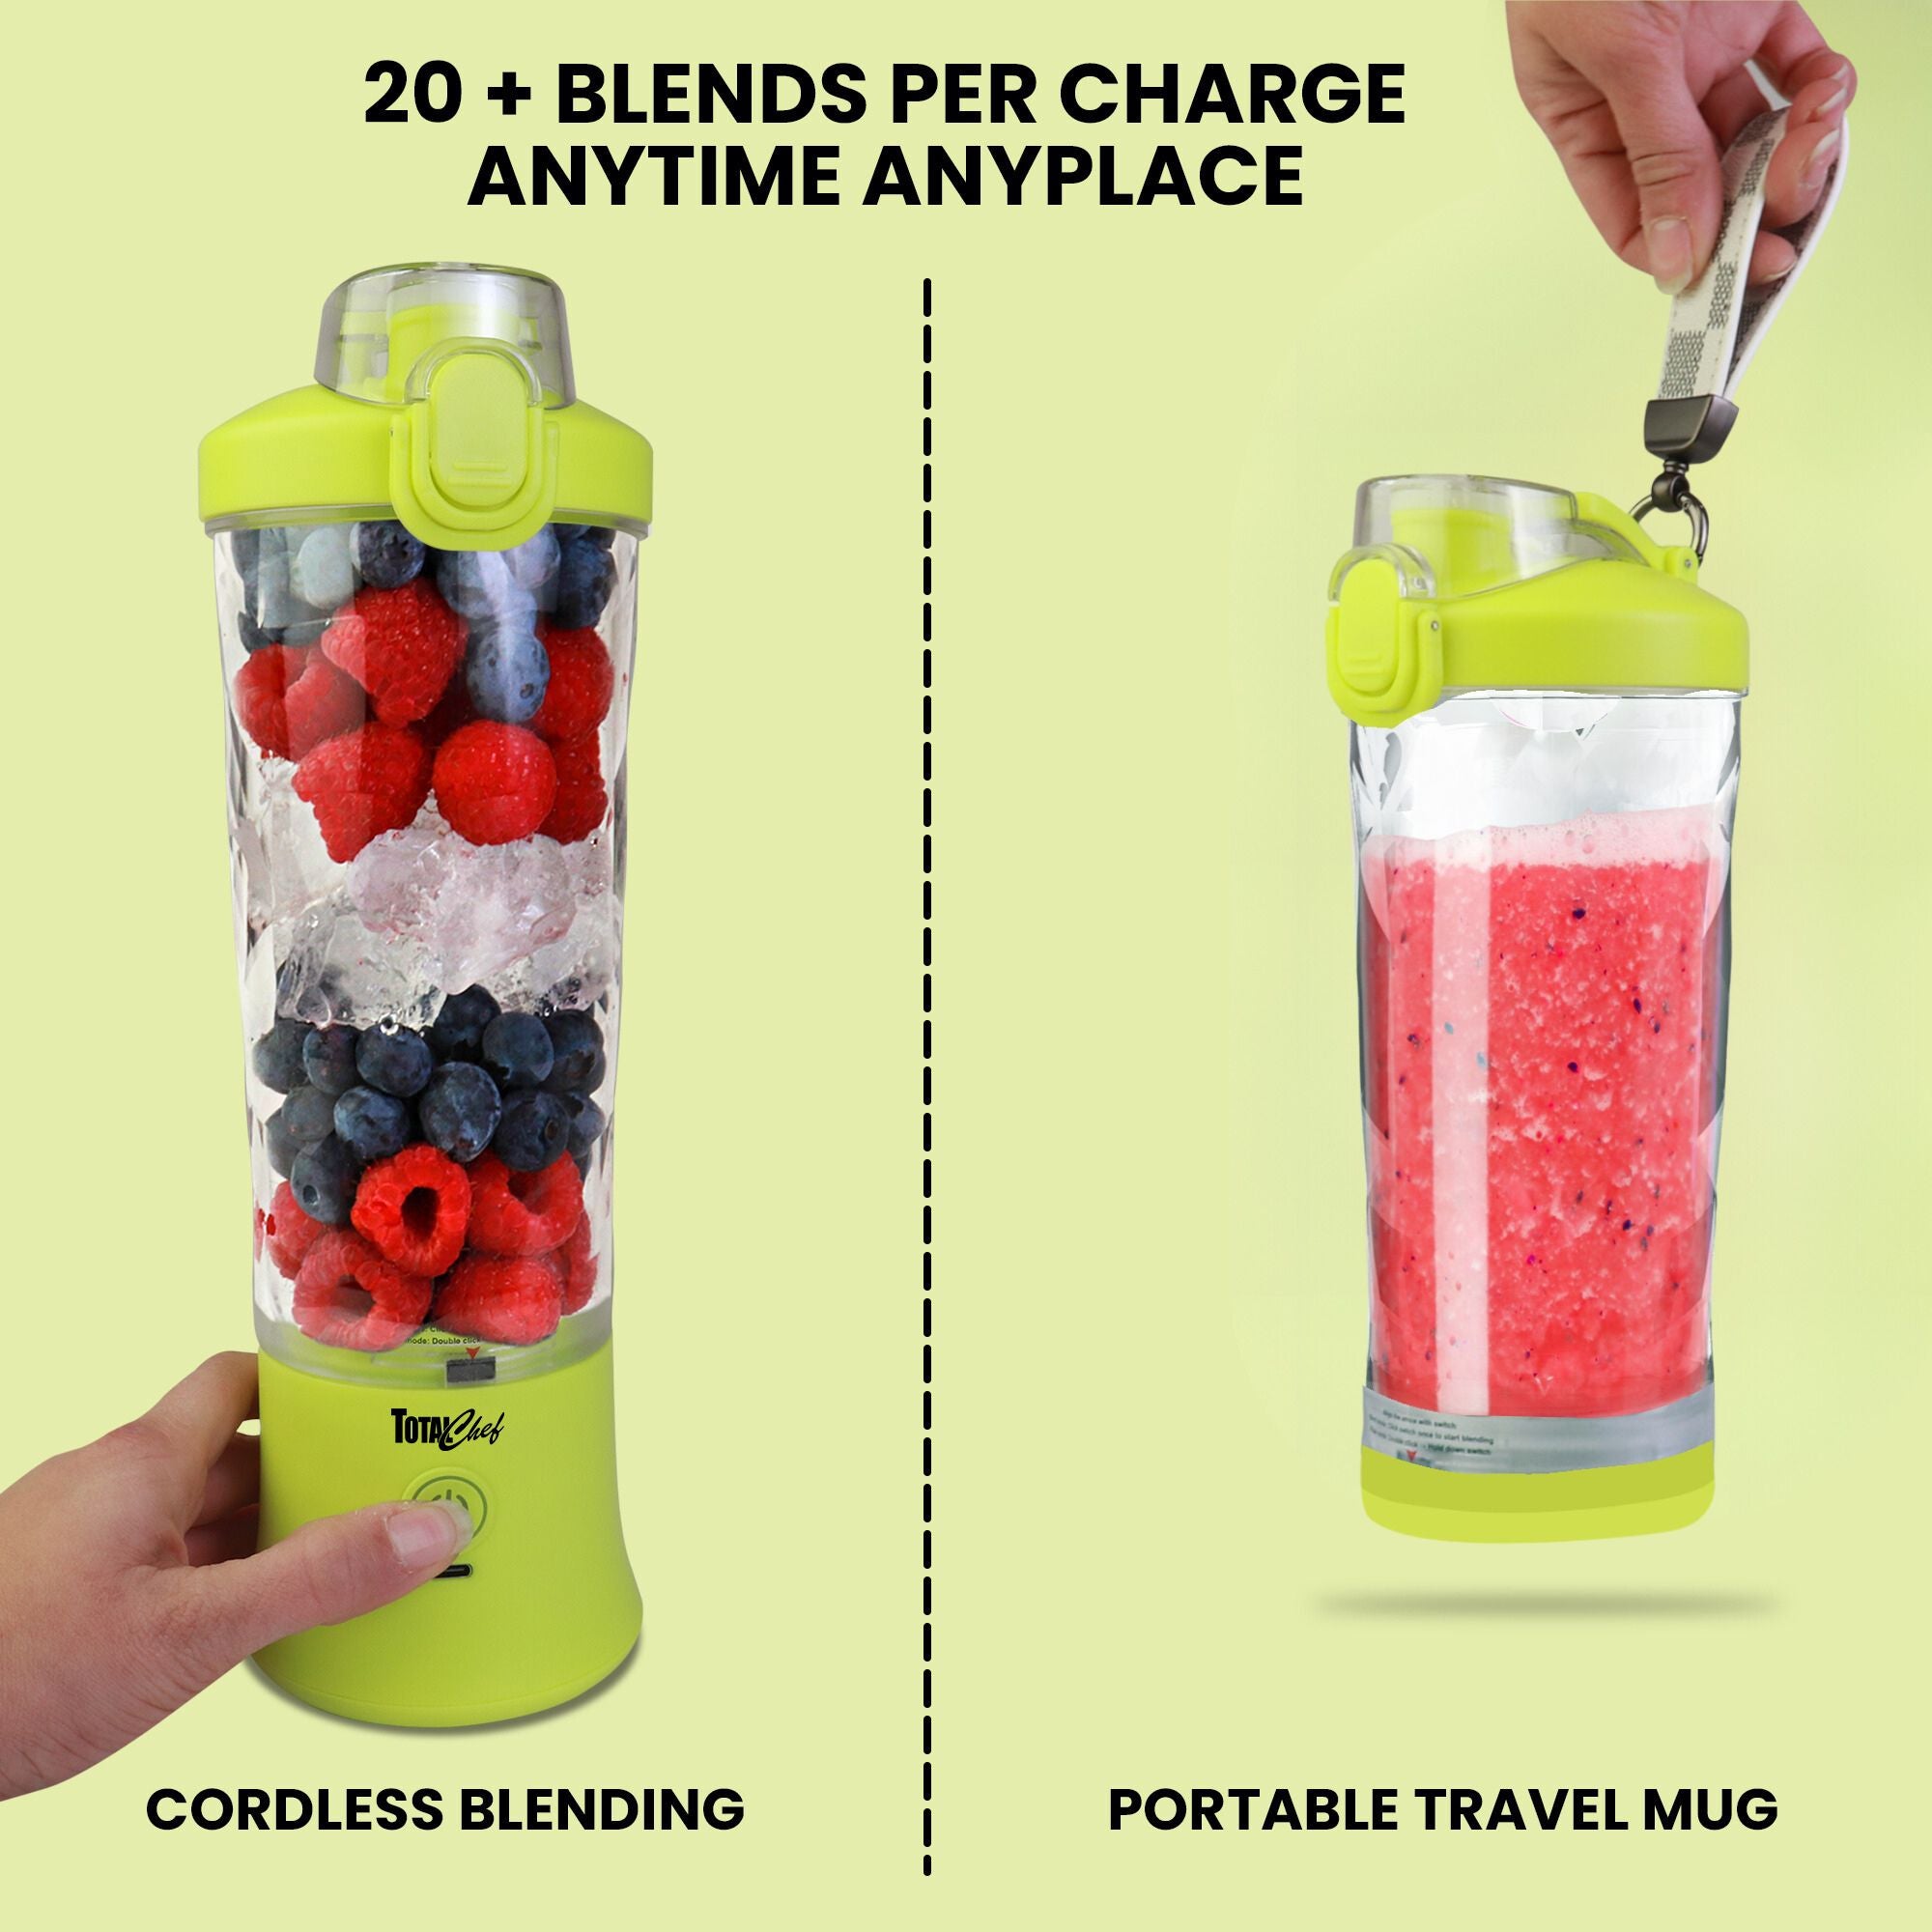 Left half shows a person's hand holding the blender, which is filled with raspberries, blueberries, and ice cubes, with their thumb on the power button. Text below reads, "Cordless blending." Right half shows a person's hand holding the blending jar, which is filled with bright red smoothie and has the travel base cover on, by the carry strap. Text below reads, "Portable travel mug." Text at the top reads, "20+ blends per charge anytime anyplace."